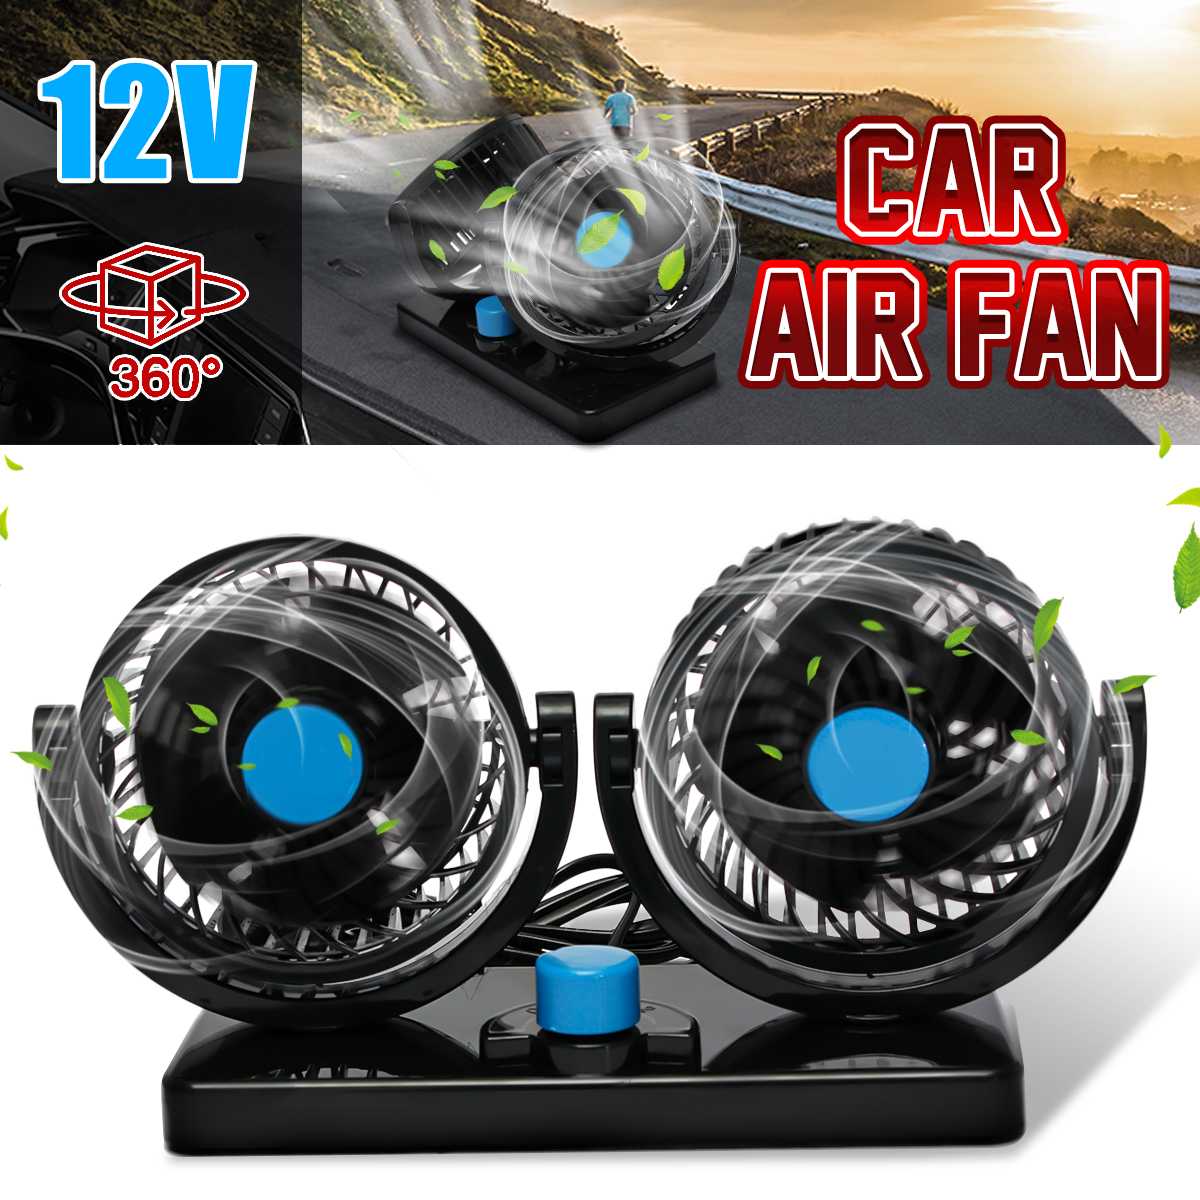 12V Dual Head 360 Graden Draaibare All-Ronde Verstelbare Car Auto Air Cooling Dual Head Low Noise Cooling ventilator Auto Accessoires